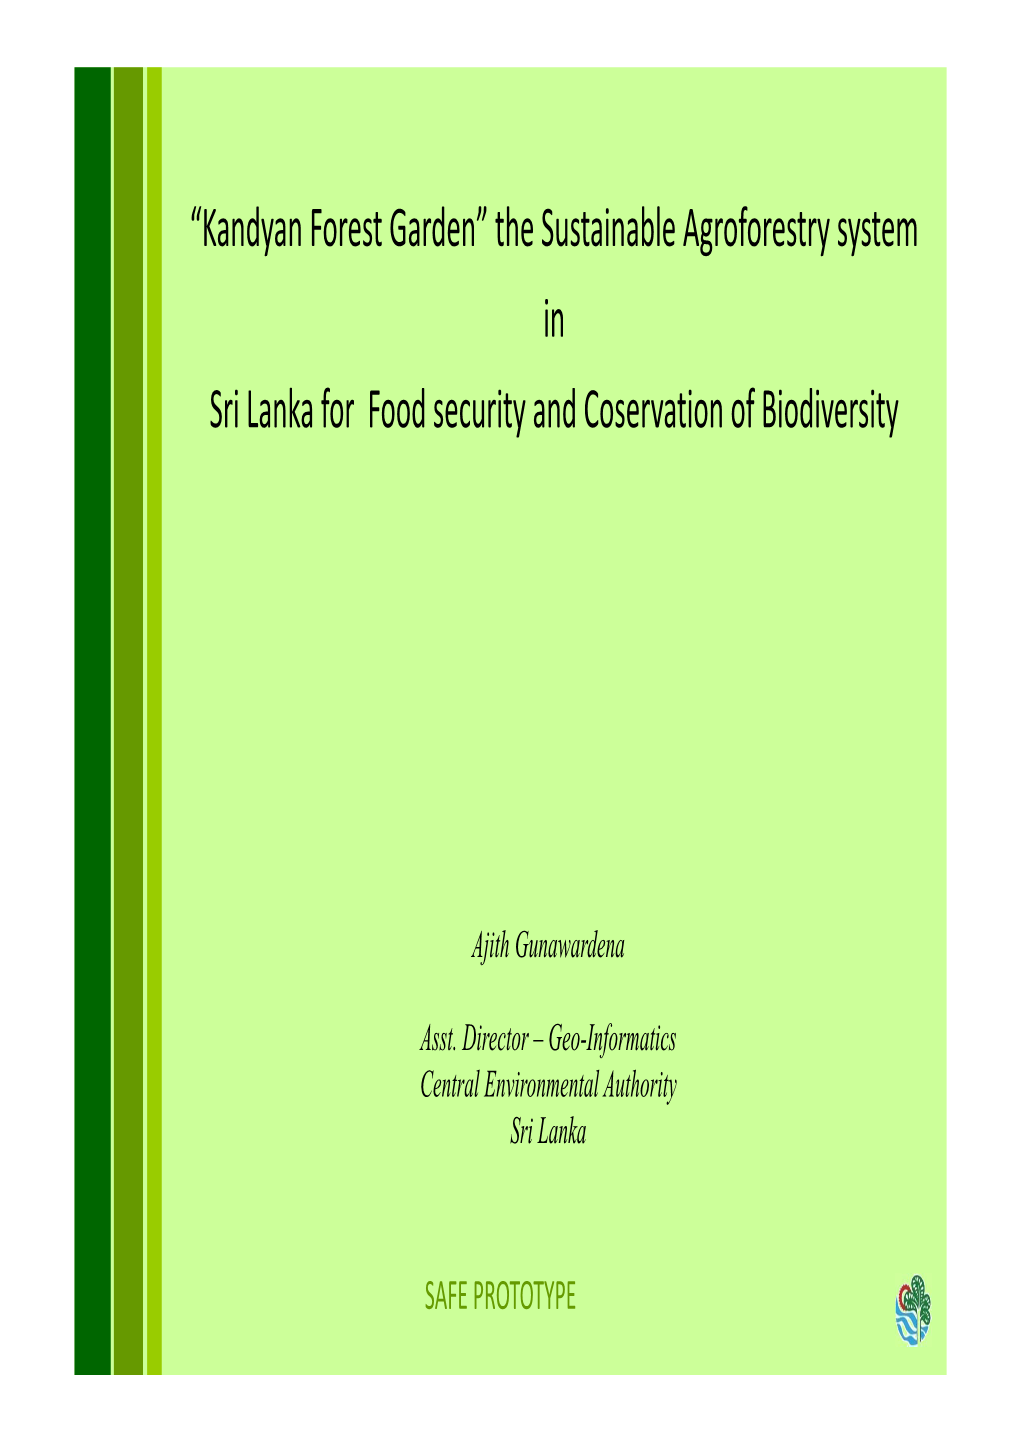 “Kandyan Forest Garden” the Sustainable Agroforestry System in Sri Lanka for Food Security and Coservation of Biodiversity